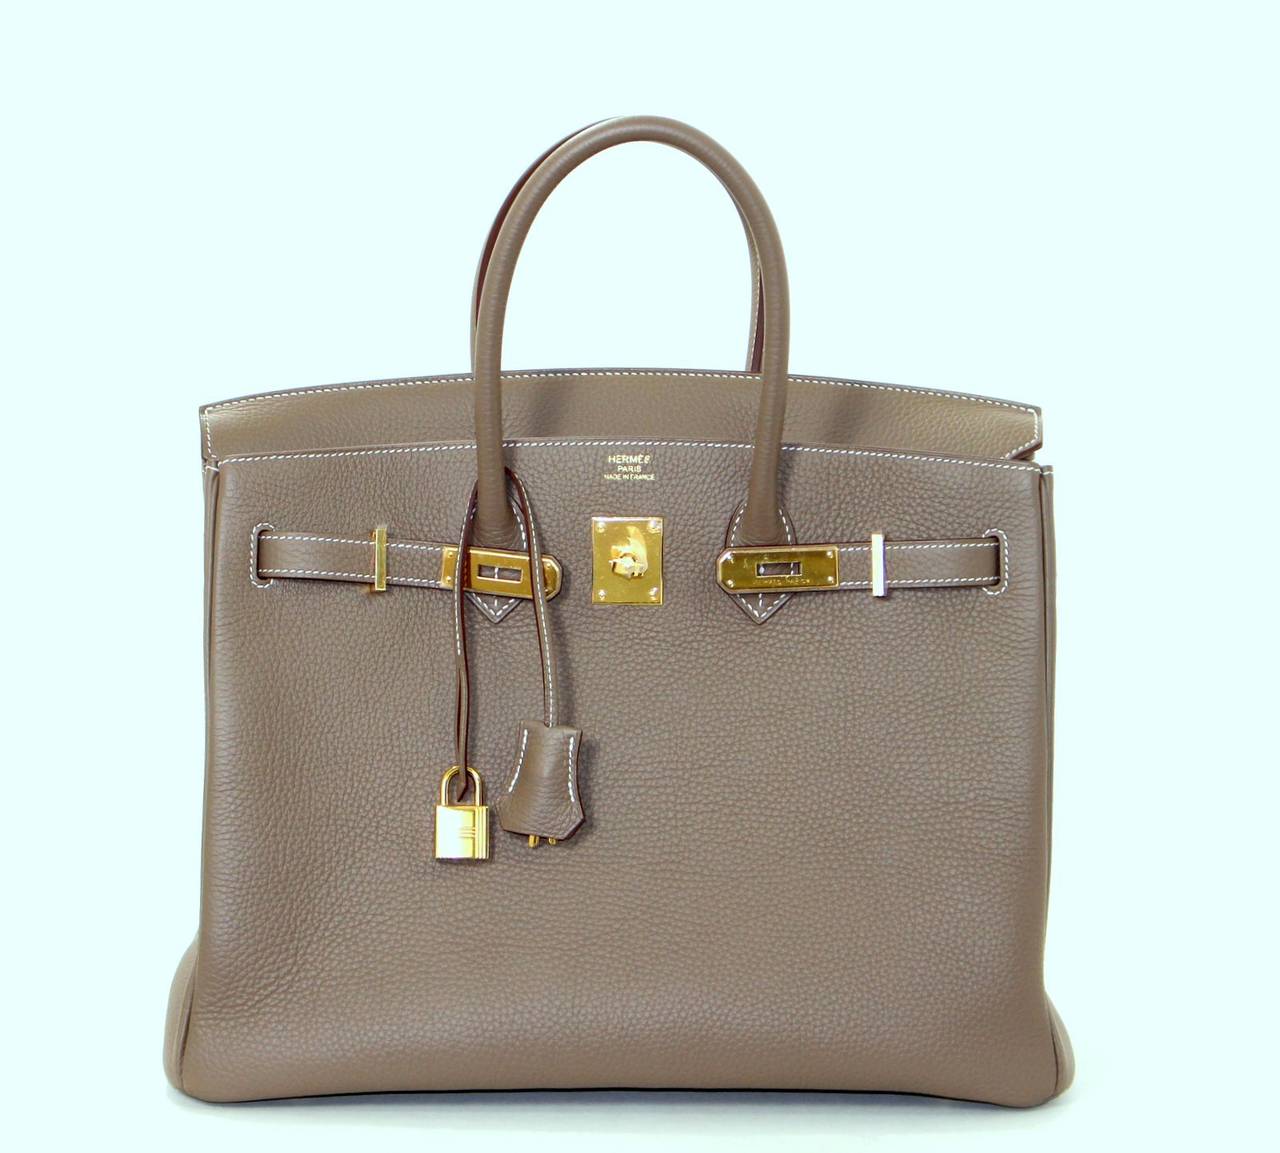 HERMES Etoupe Clemence Birkin Bag- Taupe Color with Gold HW 35 cm at ...